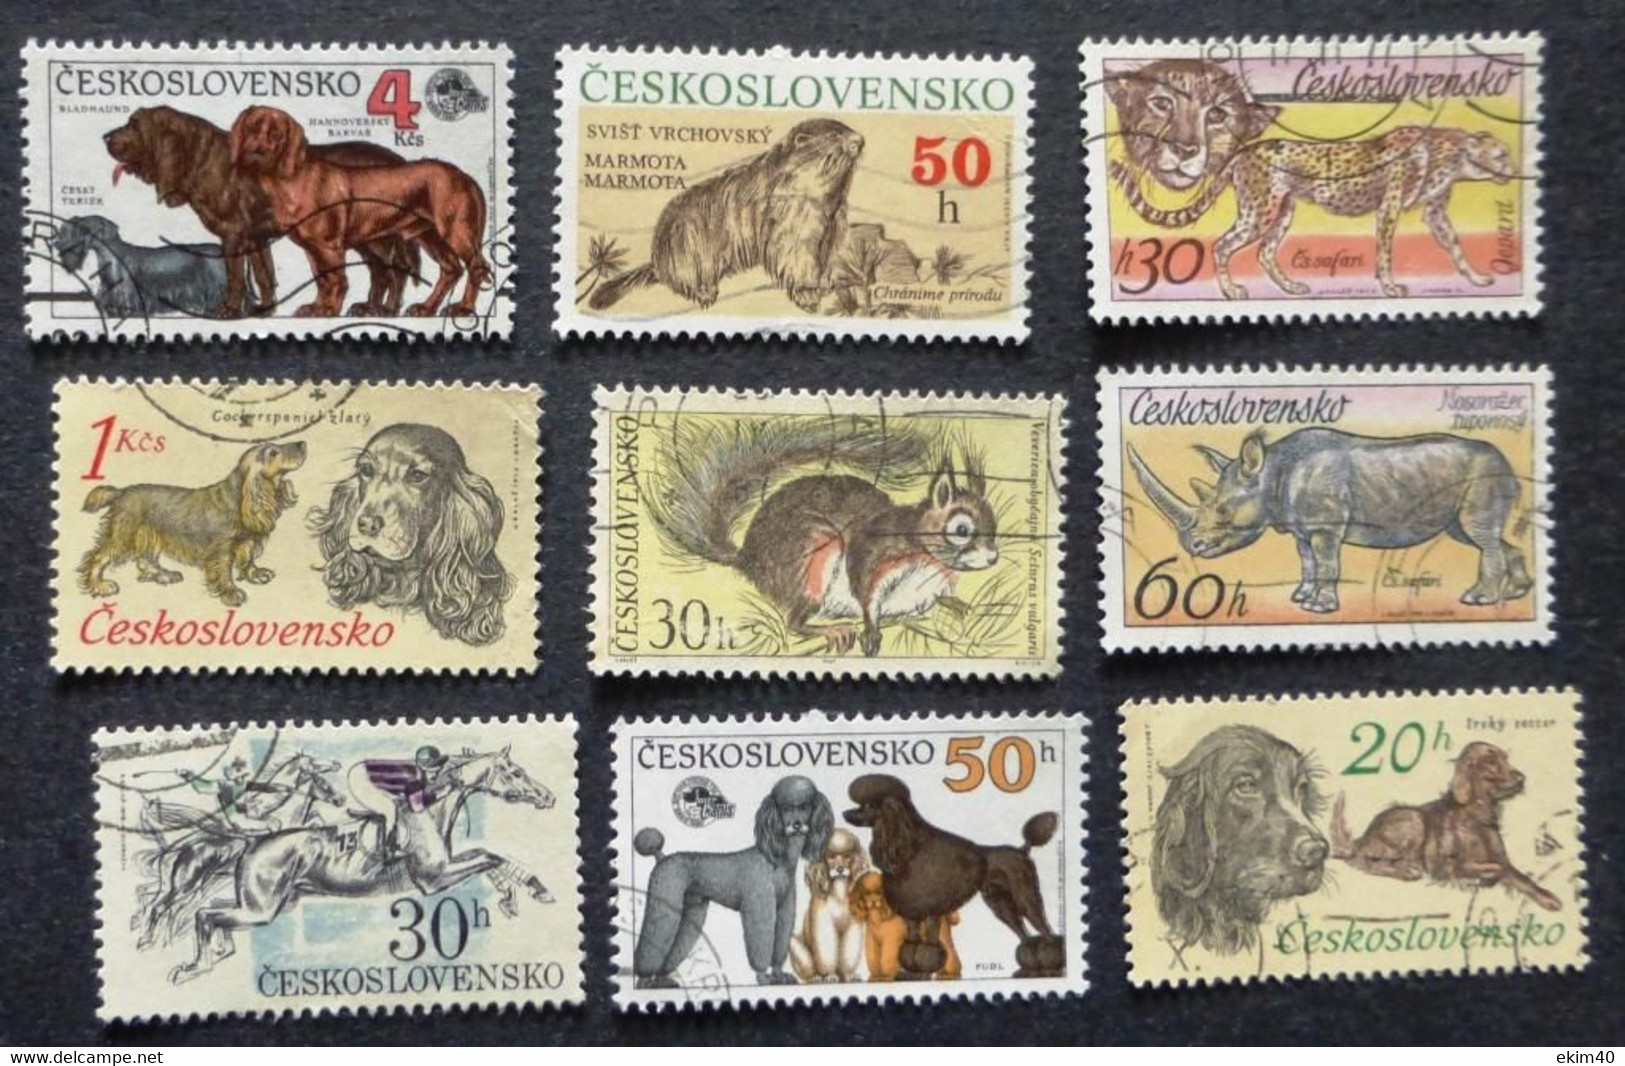 Selection Of Used/Cancelled Stamps From Czechoslovakia Wild & Domestic Animals. No DC-450 - Gebruikt